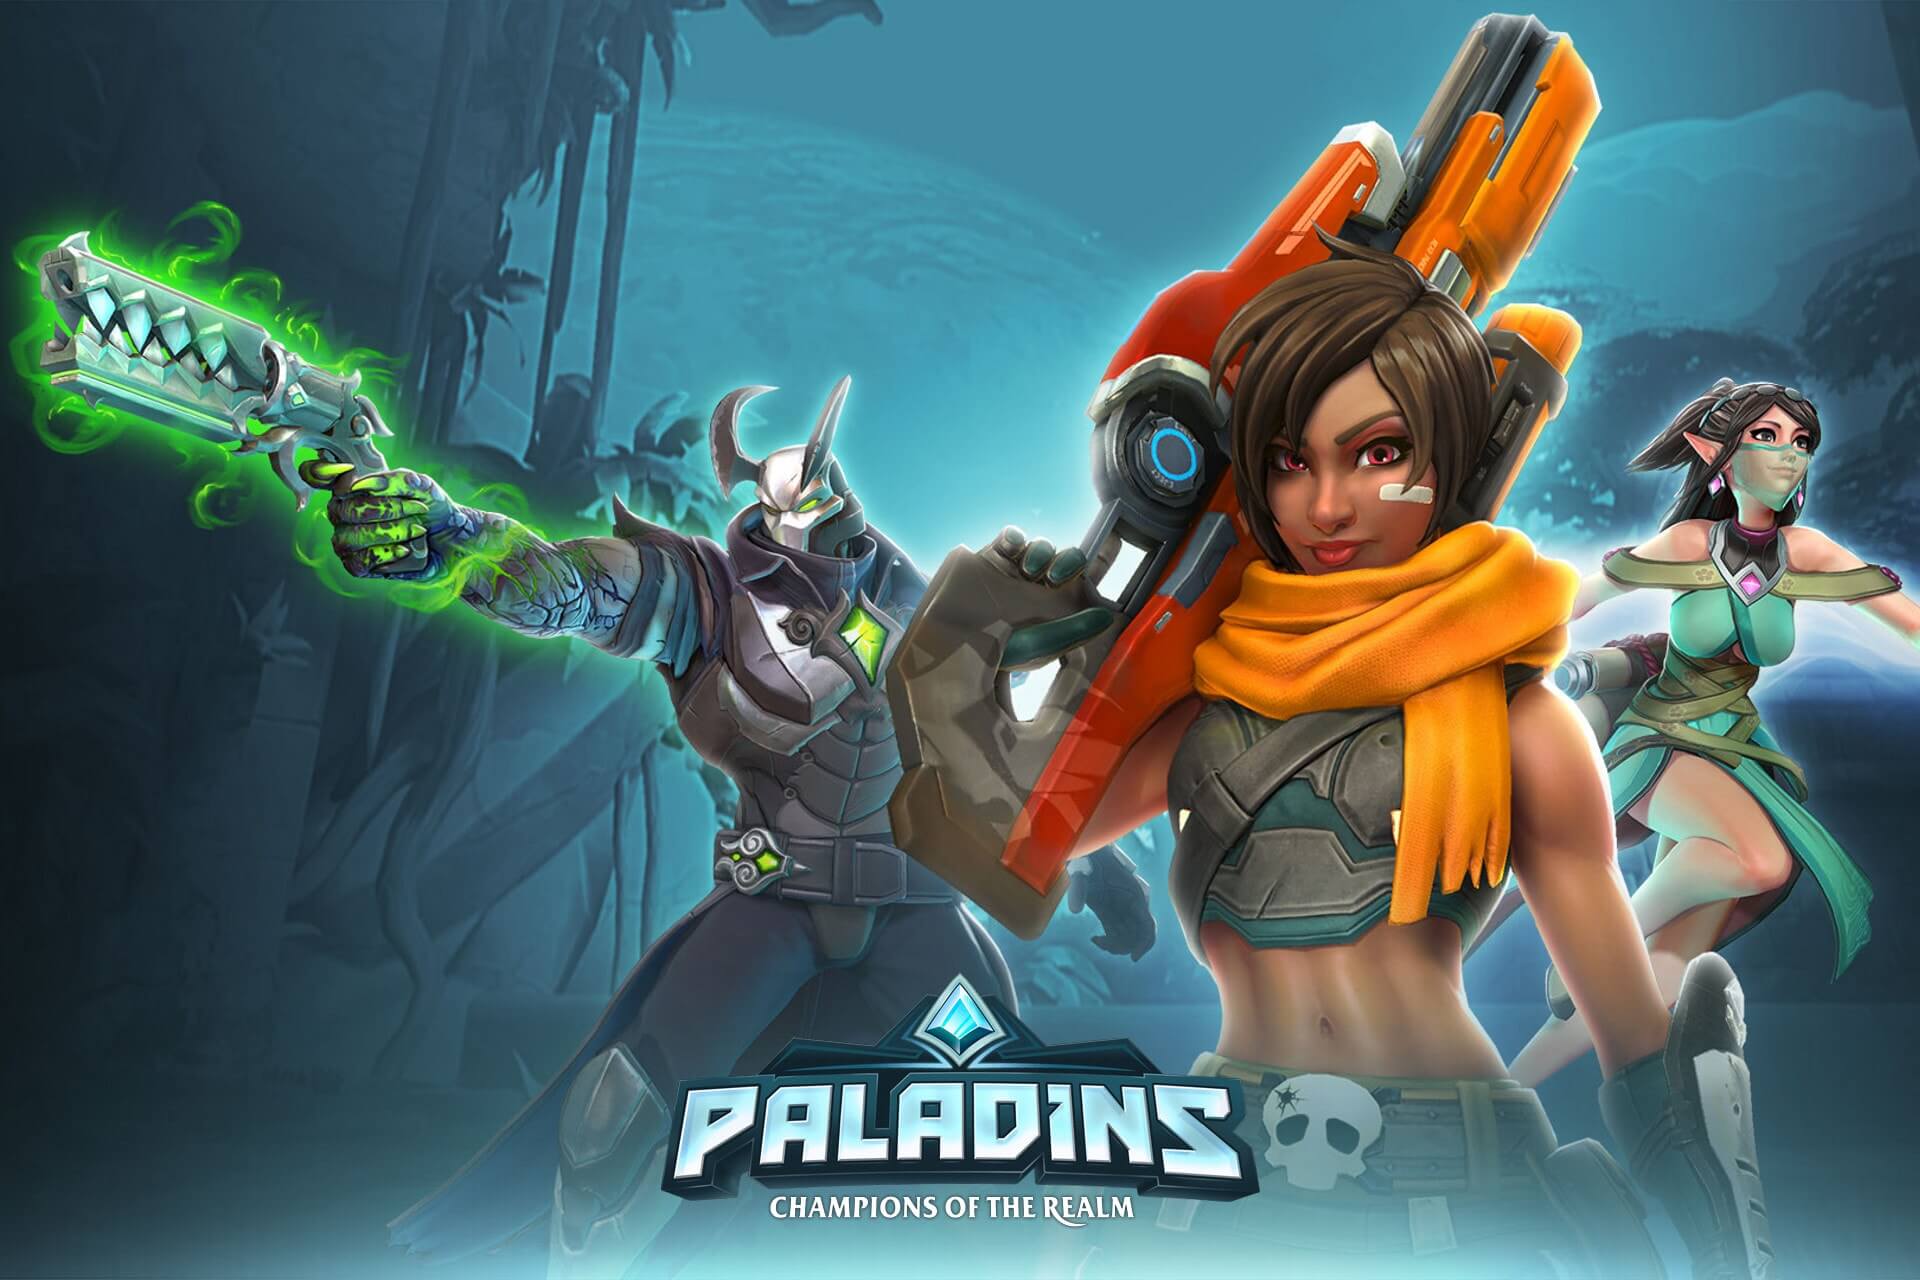 fix Paladins lag and ping with a VPN